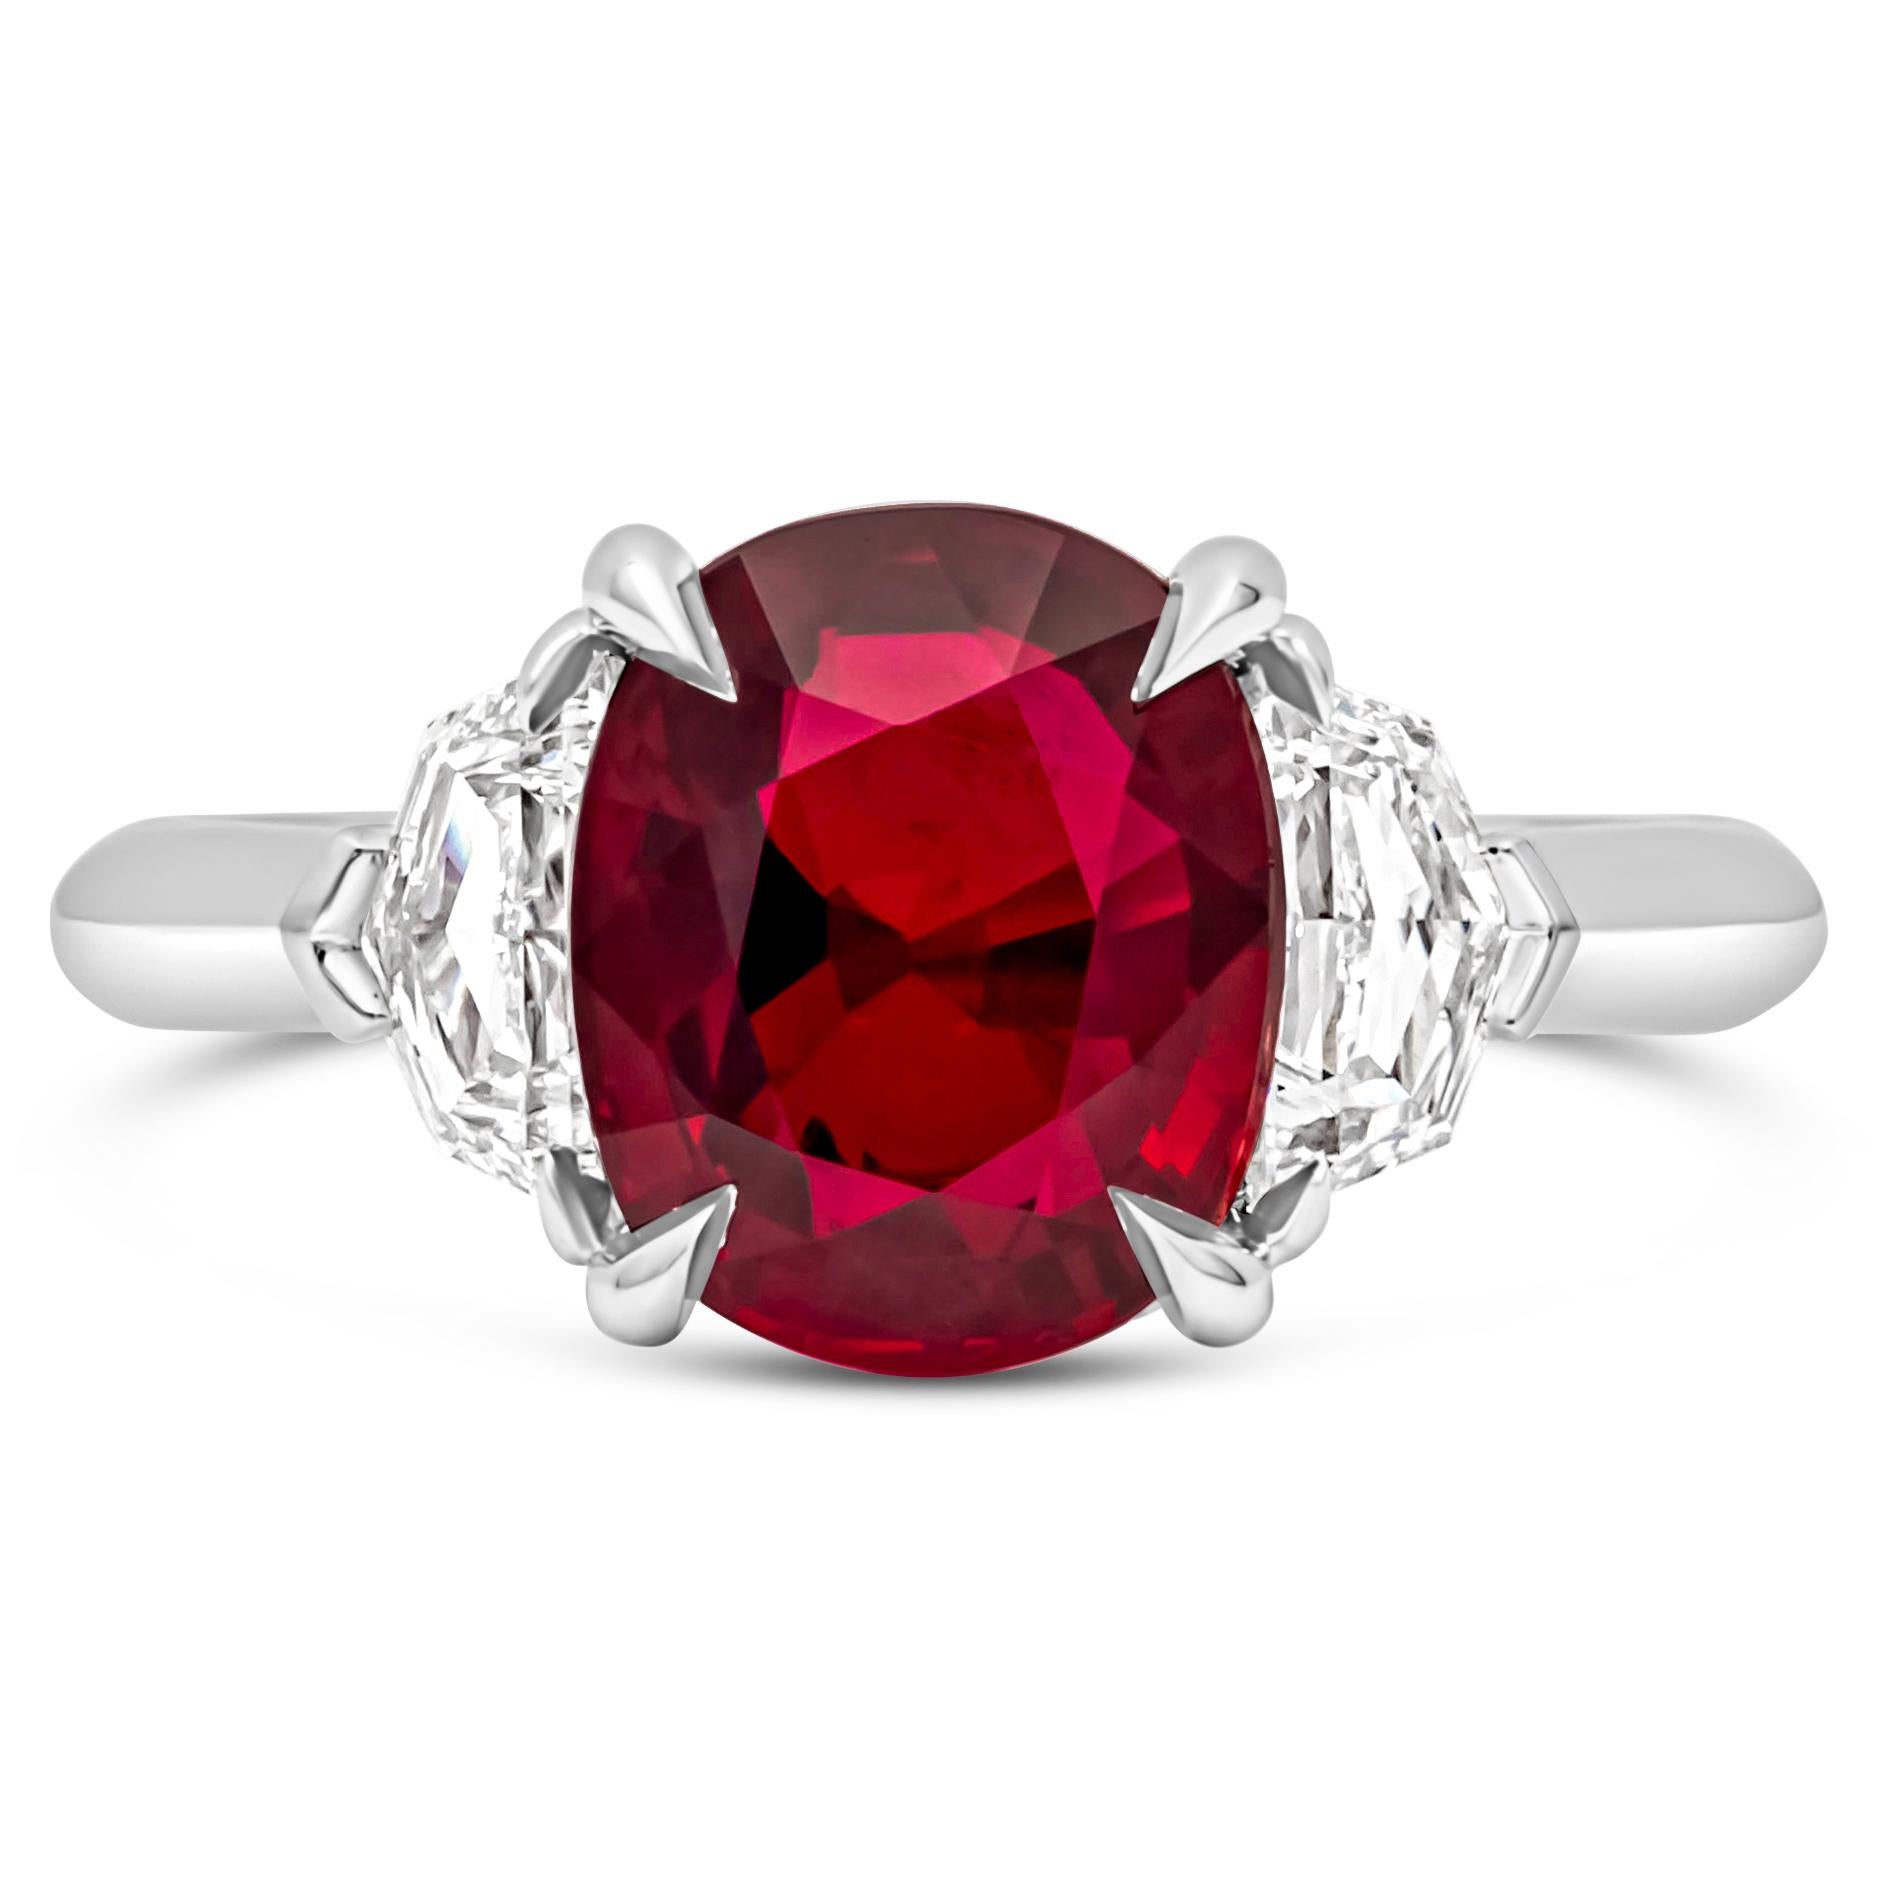 This wonderful and classy  three stone ring showcasing a GIA certified 4.02 carats cushion cut brilliant ruby in the center, set in a four prong basket setting. Flanked by two epaulette cut diamond on each side weighing 0.50 carat total, F Color and